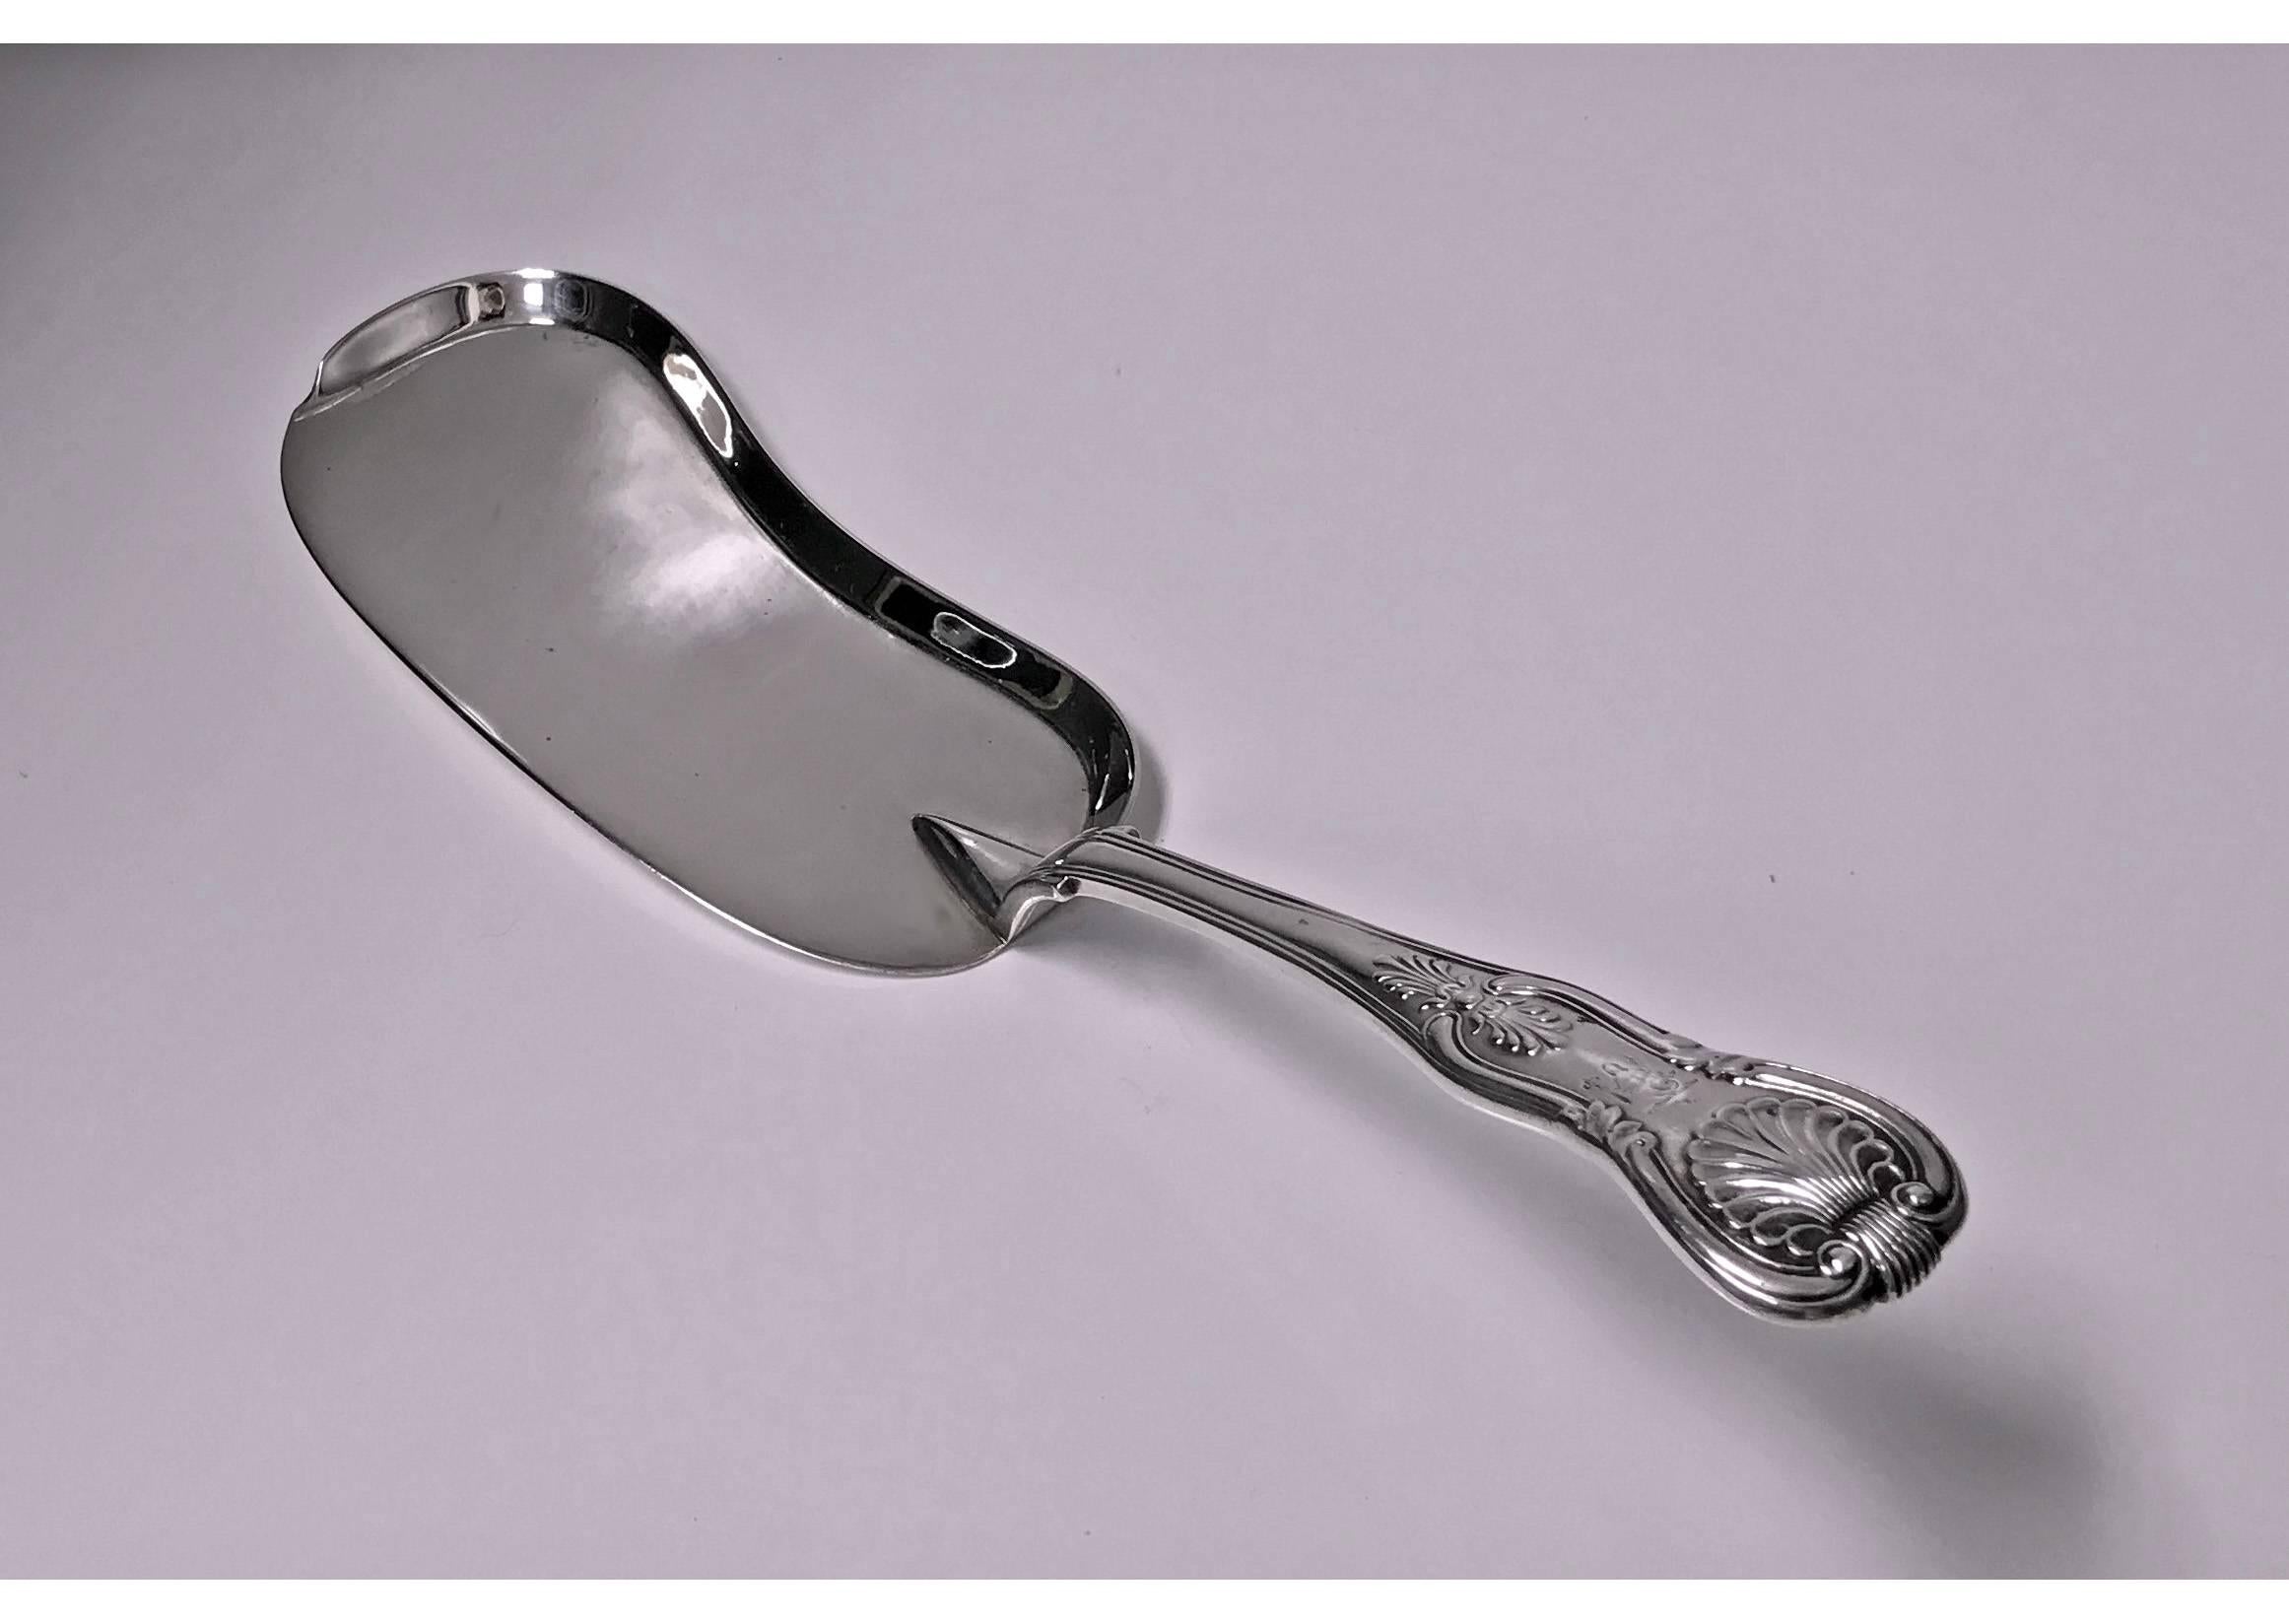 Rare Irish silver Slice or Crumb Scoop, Dublin, 1855, John Smyth. The Crumber of Kings pattern, engraved crest of a mermaid holding a sword and sceptre. Measure: Length 13 inches. Weight 9.75 oz.